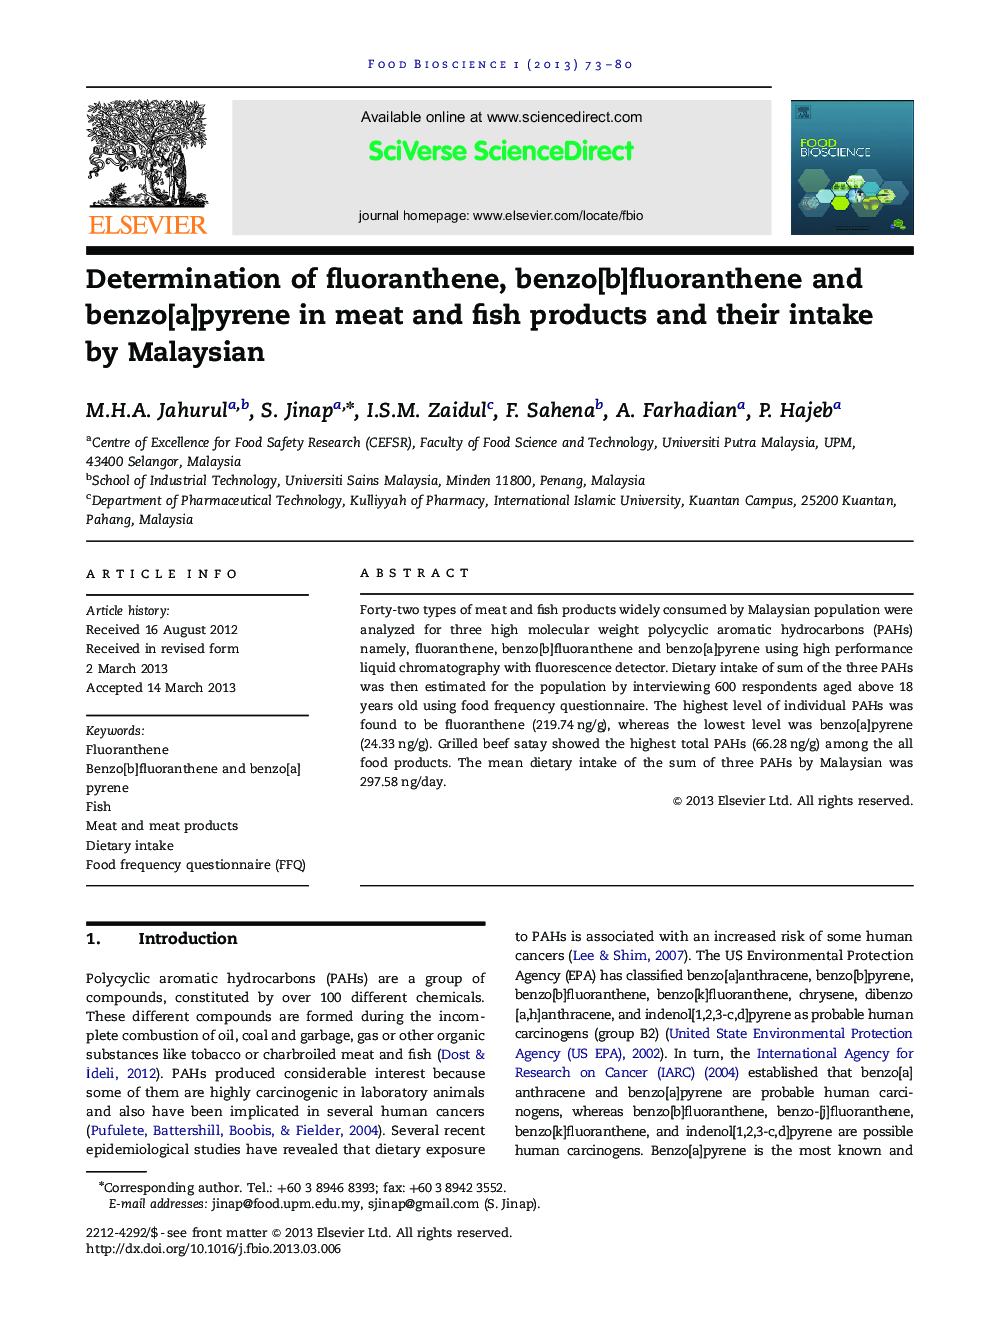 Determination of fluoranthene, benzo[b]fluoranthene and benzo[a]pyrene in meat and fish products and their intake by Malaysian